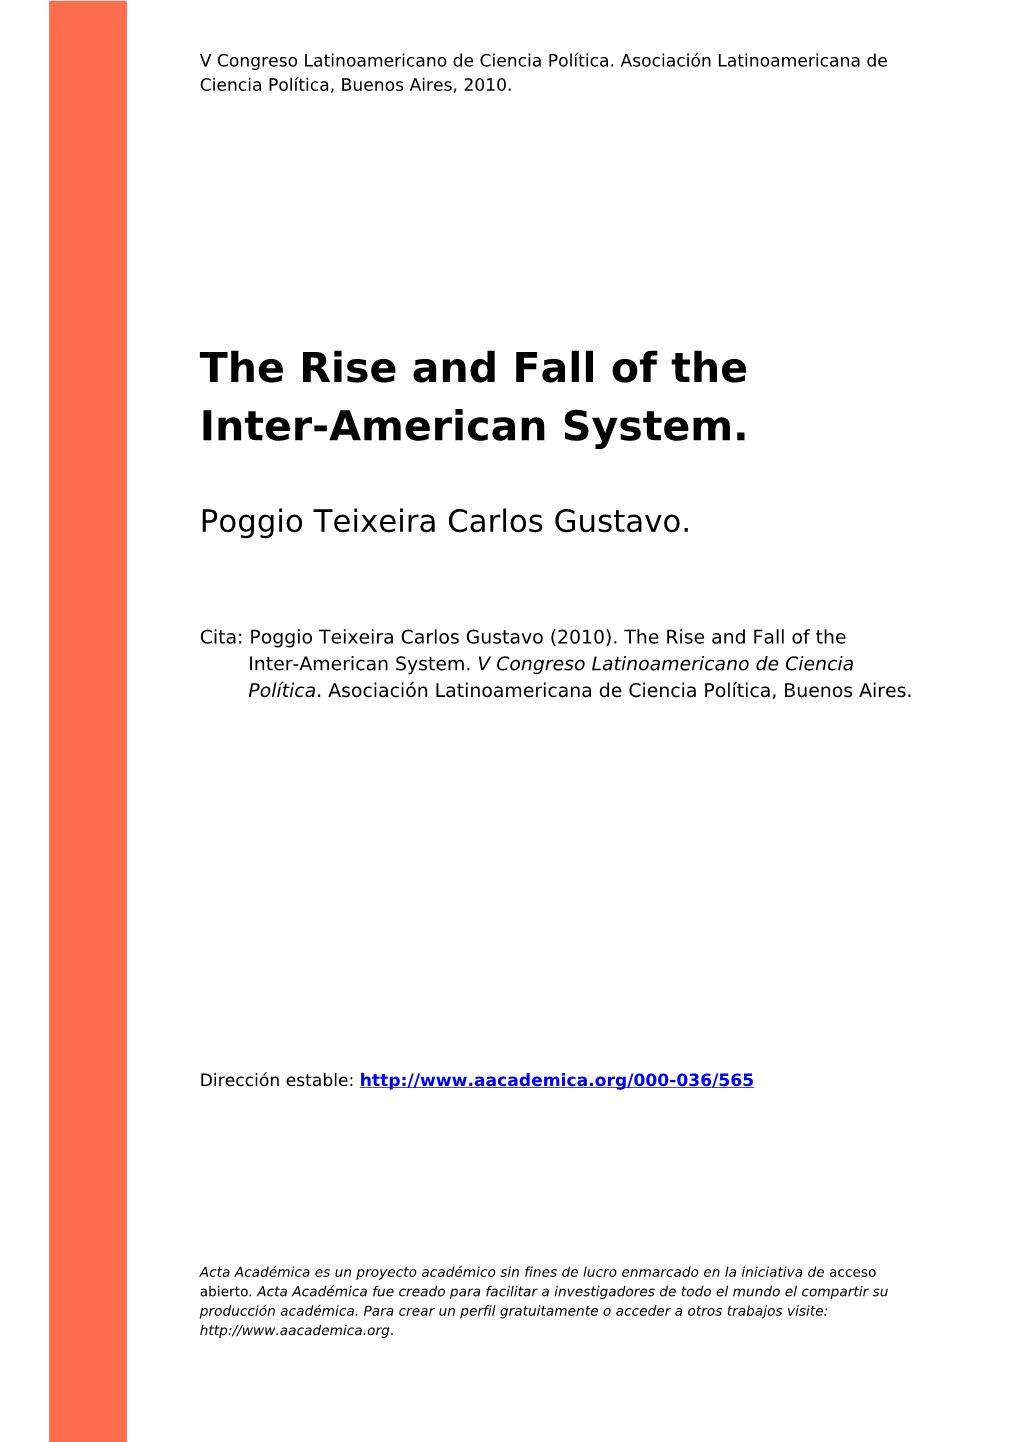 The Rise and Fall of the Inter-American System